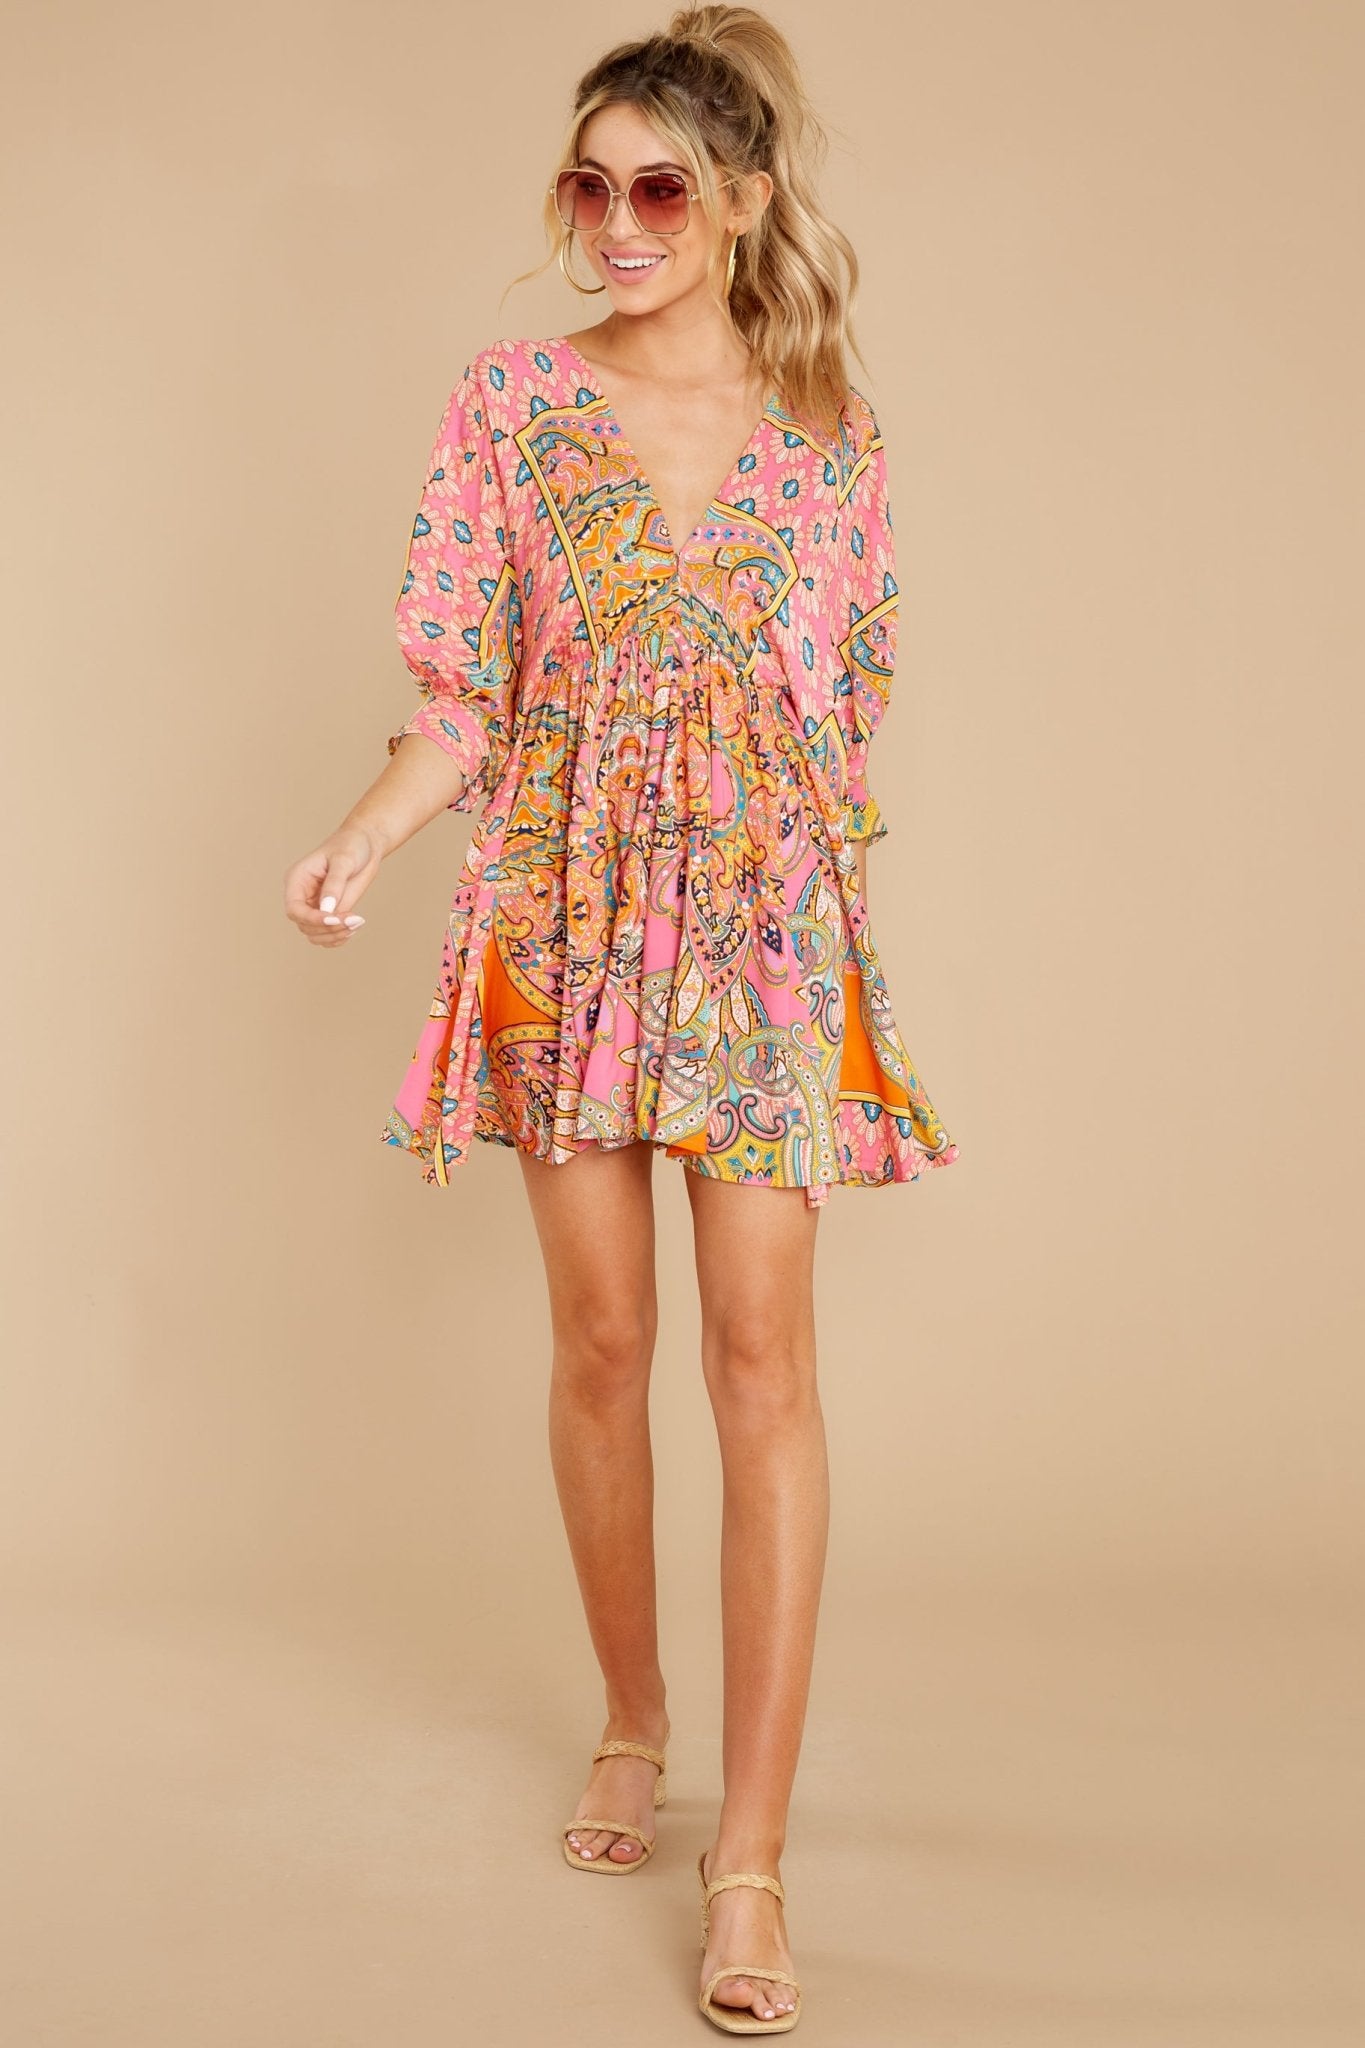 Here's To The Chase Pink Multi Print Dress - Red Dress